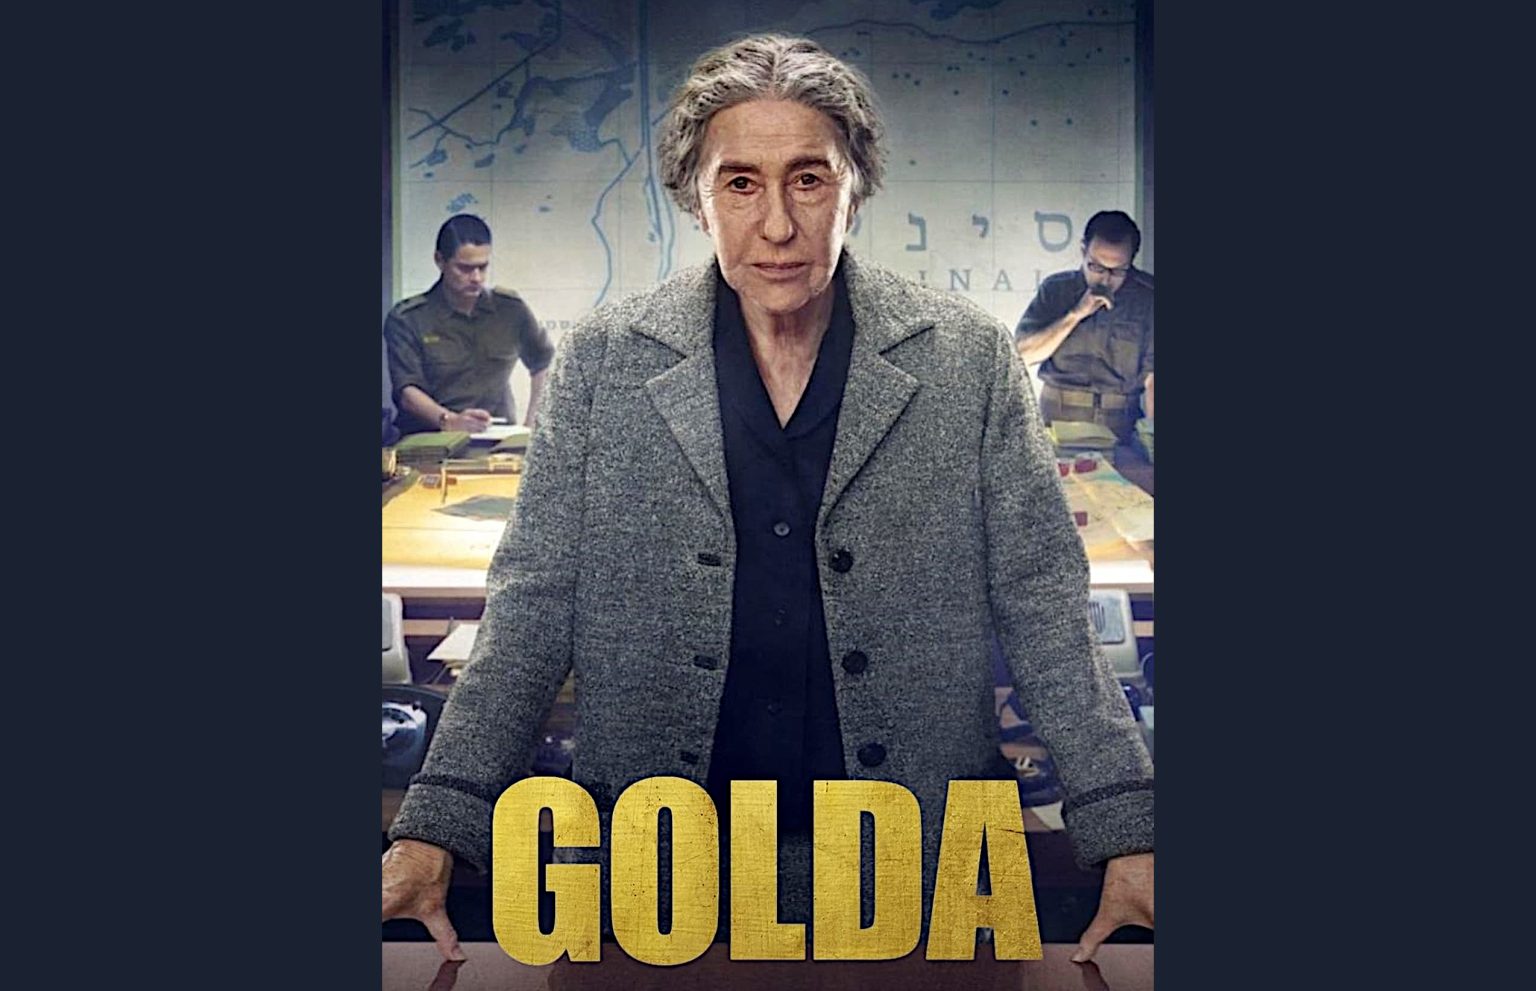 movie review on golda